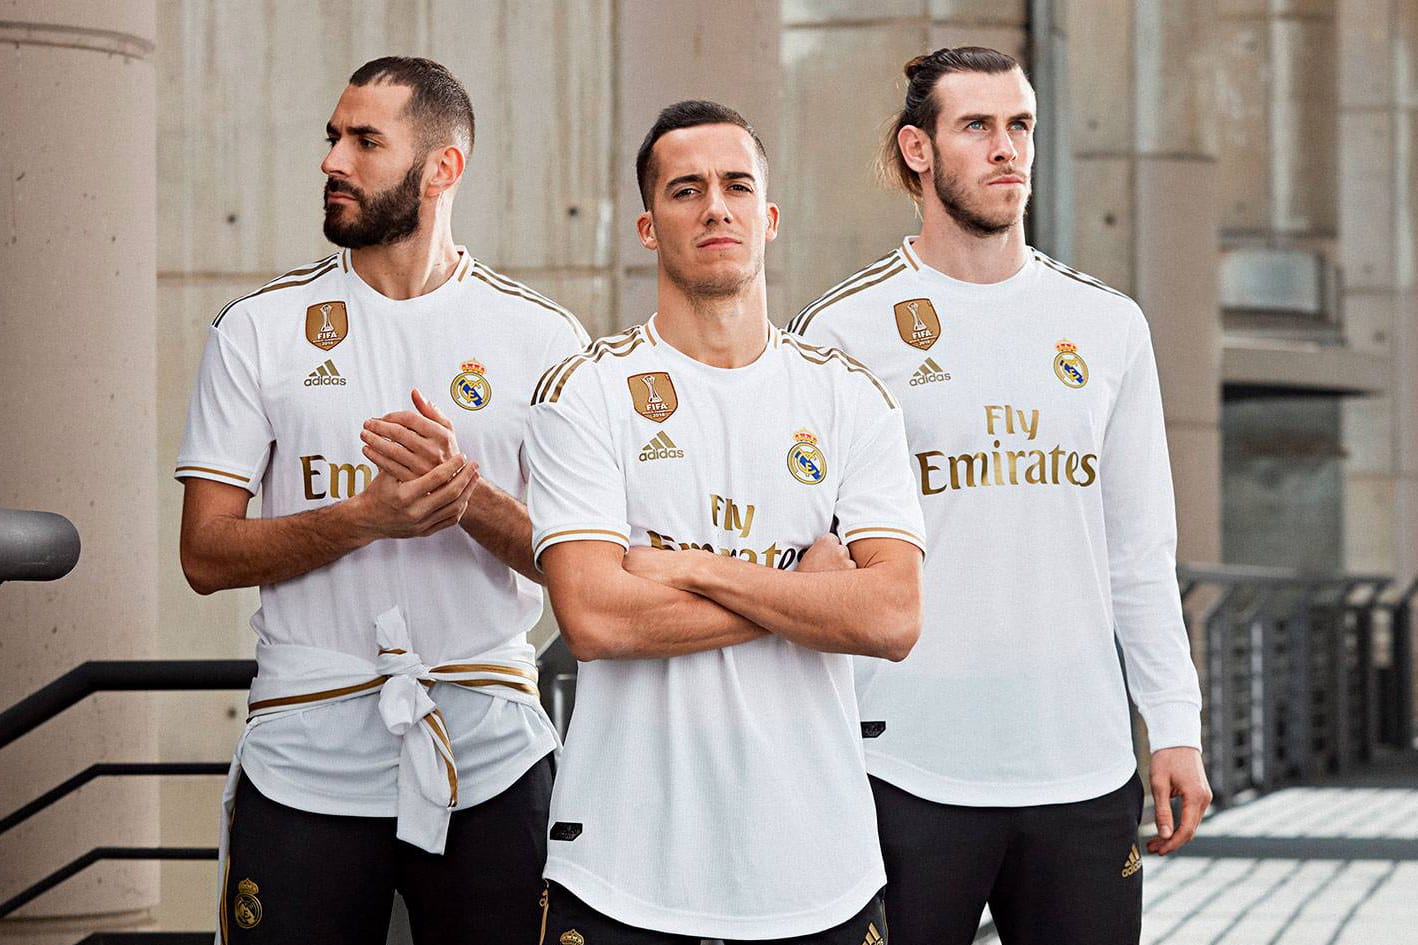 real madrid fc jersey 2020